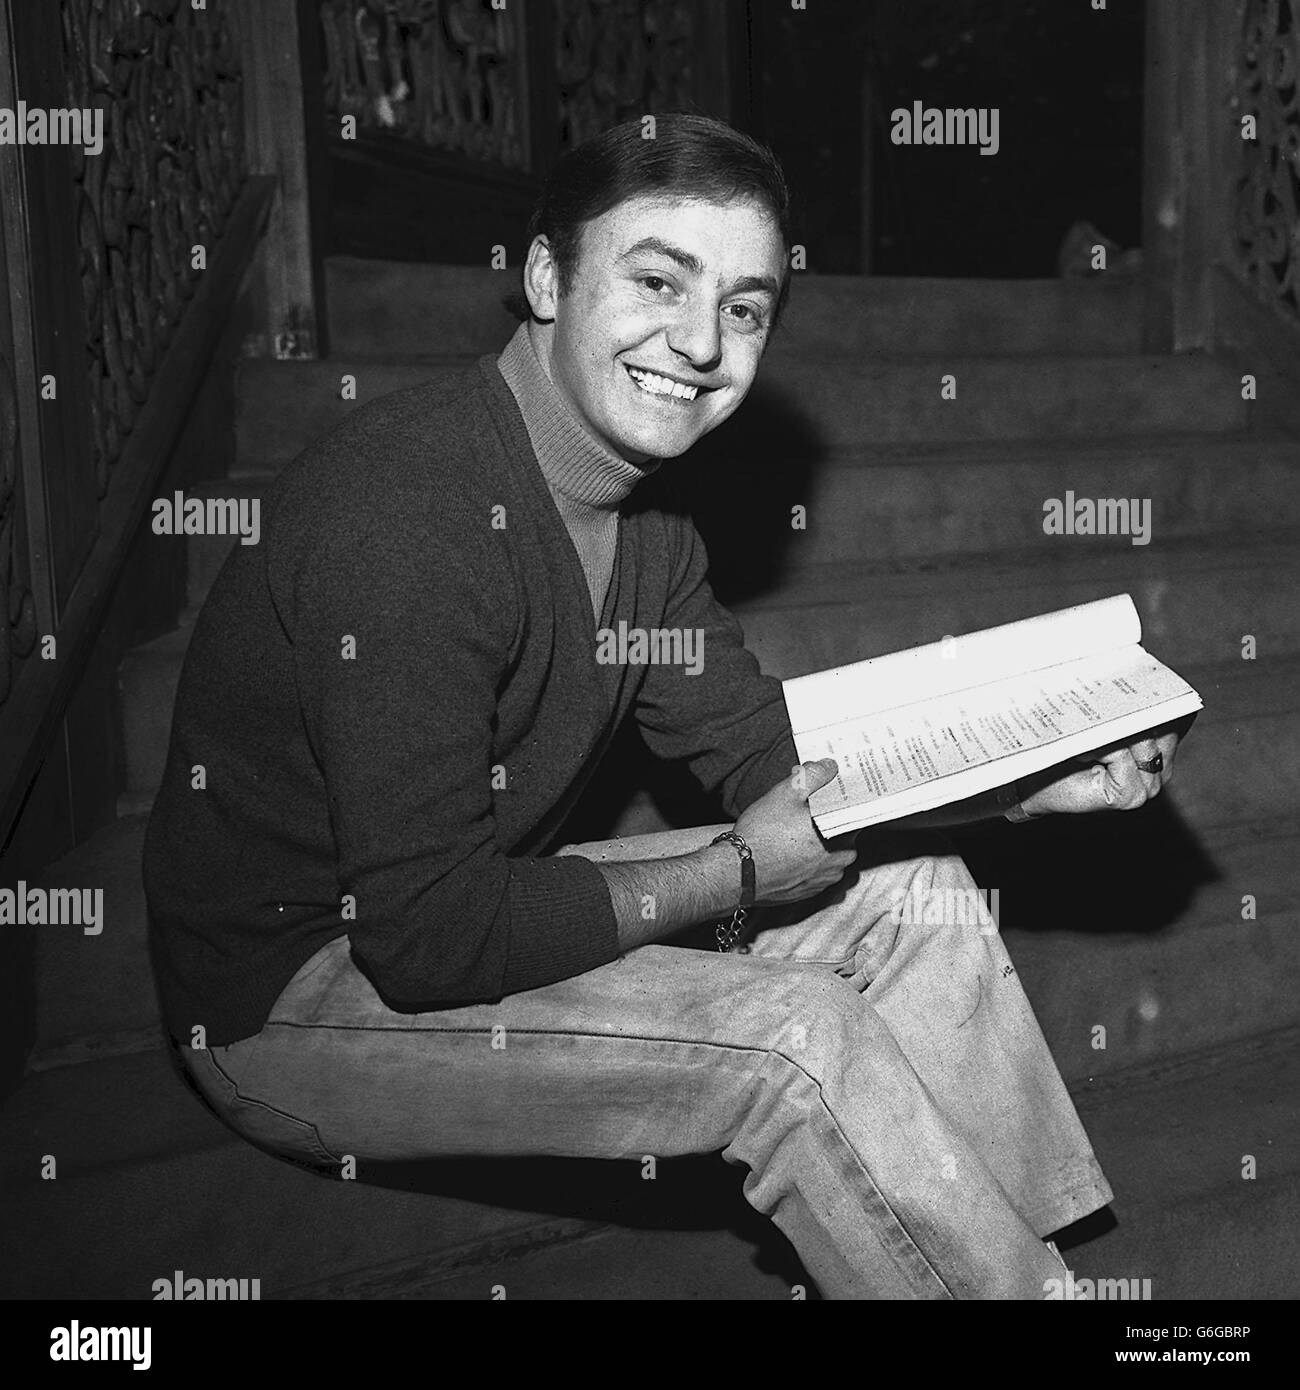 Reading the script at the adelphi theatre Black and White Stock Photos ...